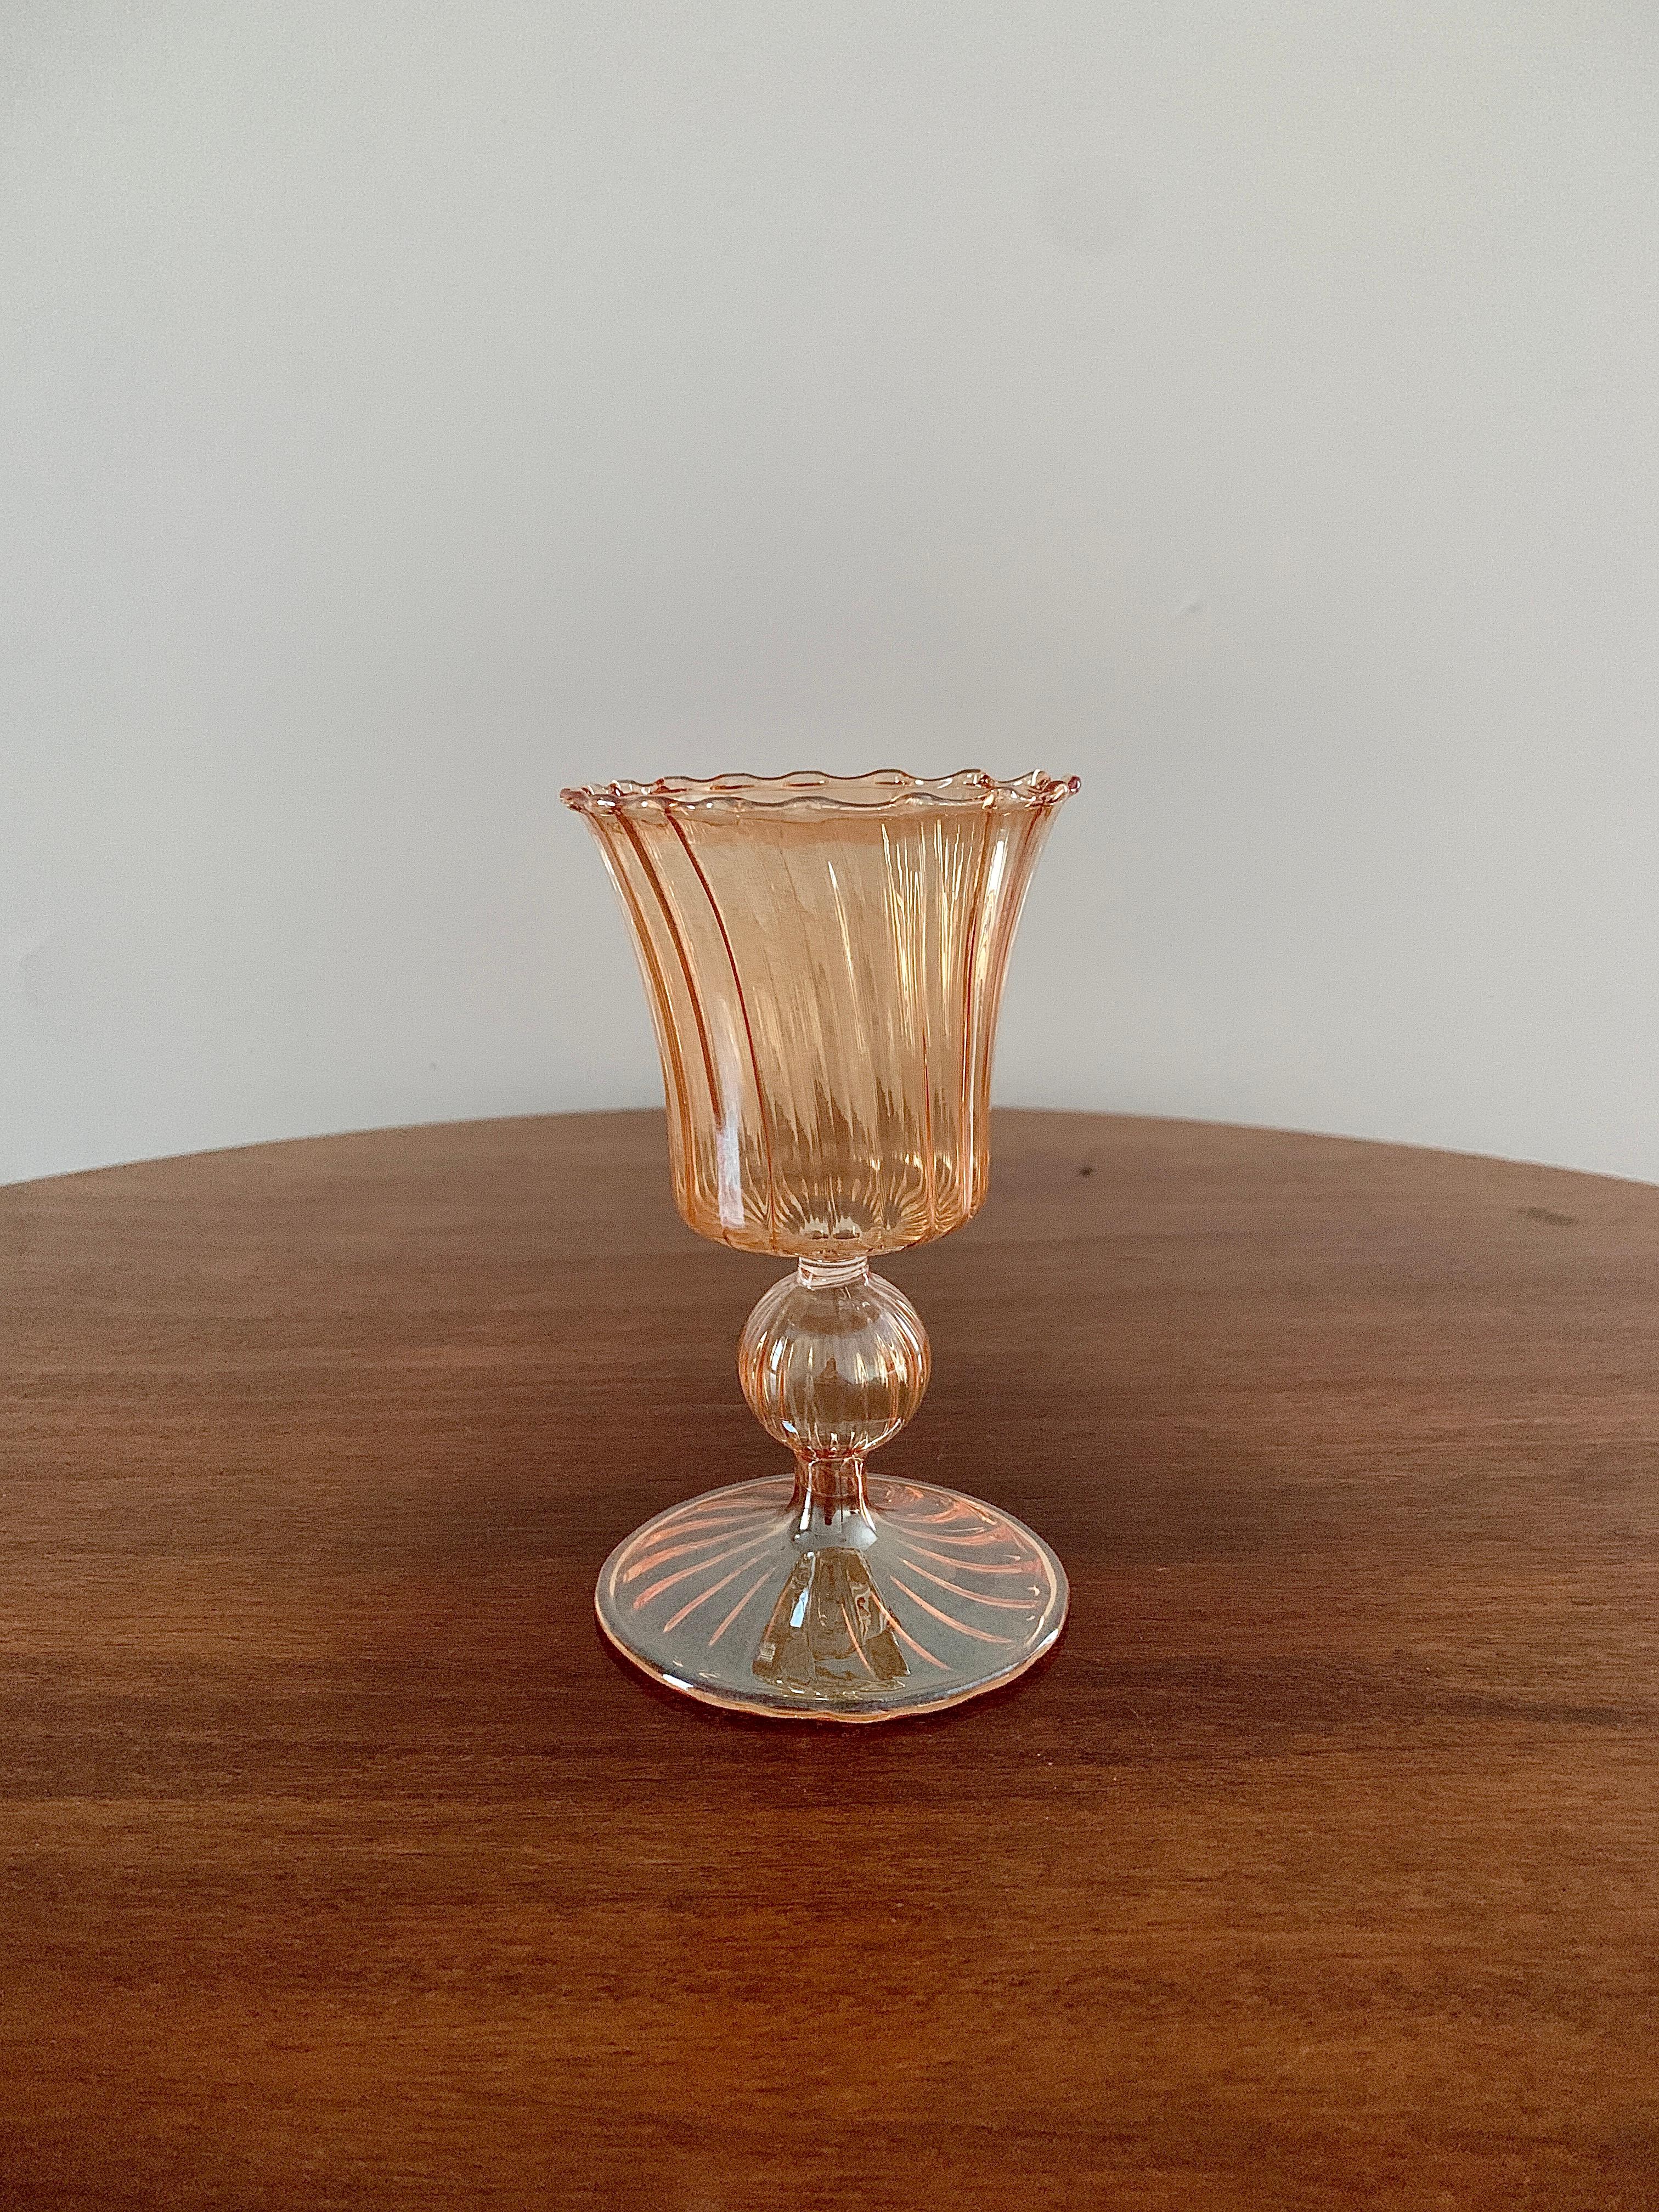 A stunning peach colored Venetian glass candle holder

Italy, Mid-20th Century

Measures: 3.13